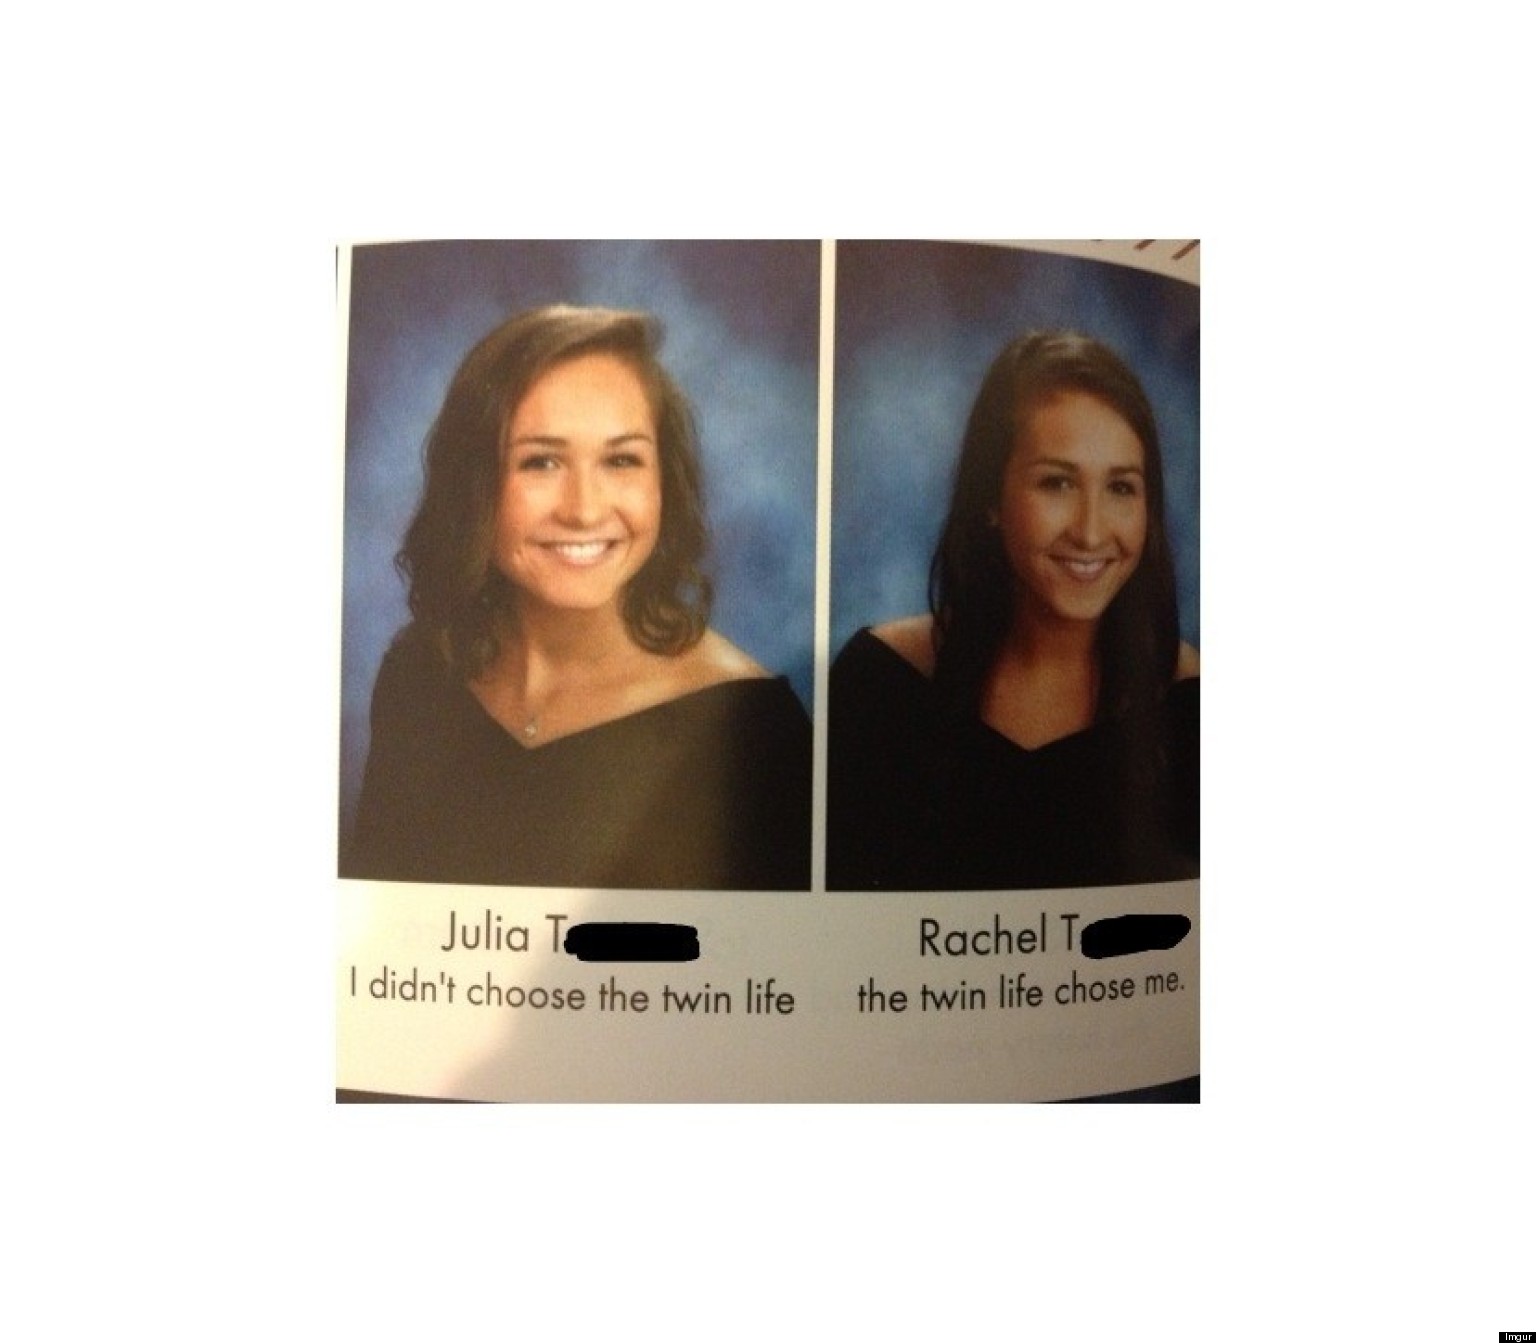 Twins' Yearbook Quote Reveals Truth About 'Twin Life 